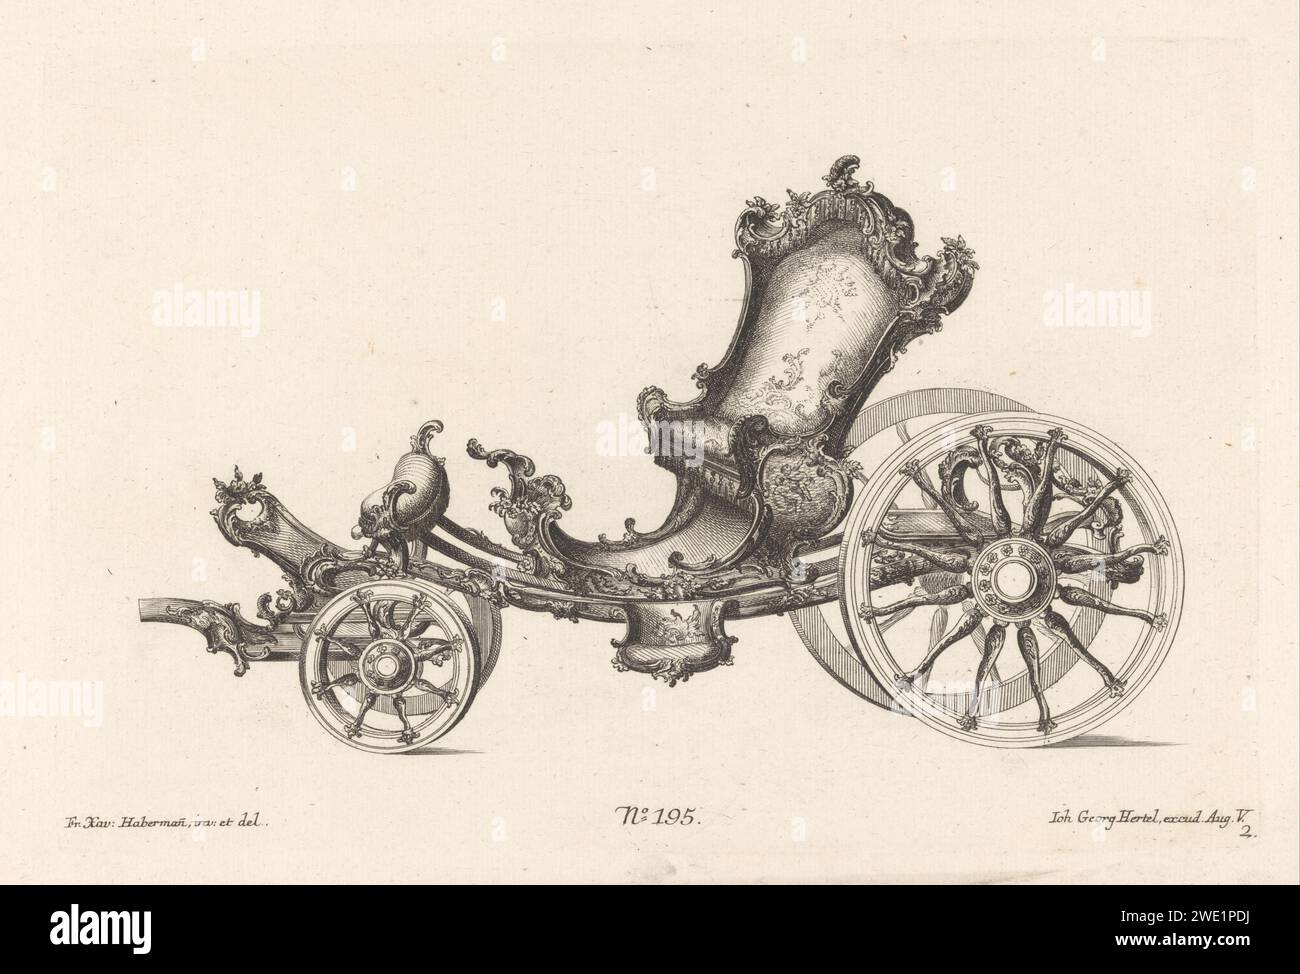 Open Koets, Anonymous, after Franz Xaver Habermann, 1731 - 1775 print Open carriage with rocaille ornaments and leaf motifs. Publishing number 195. Augsburg paper etching / engraving four-wheeled, animal-drawn vehicle, e.g.: cab, carriage, coach Stock Photo